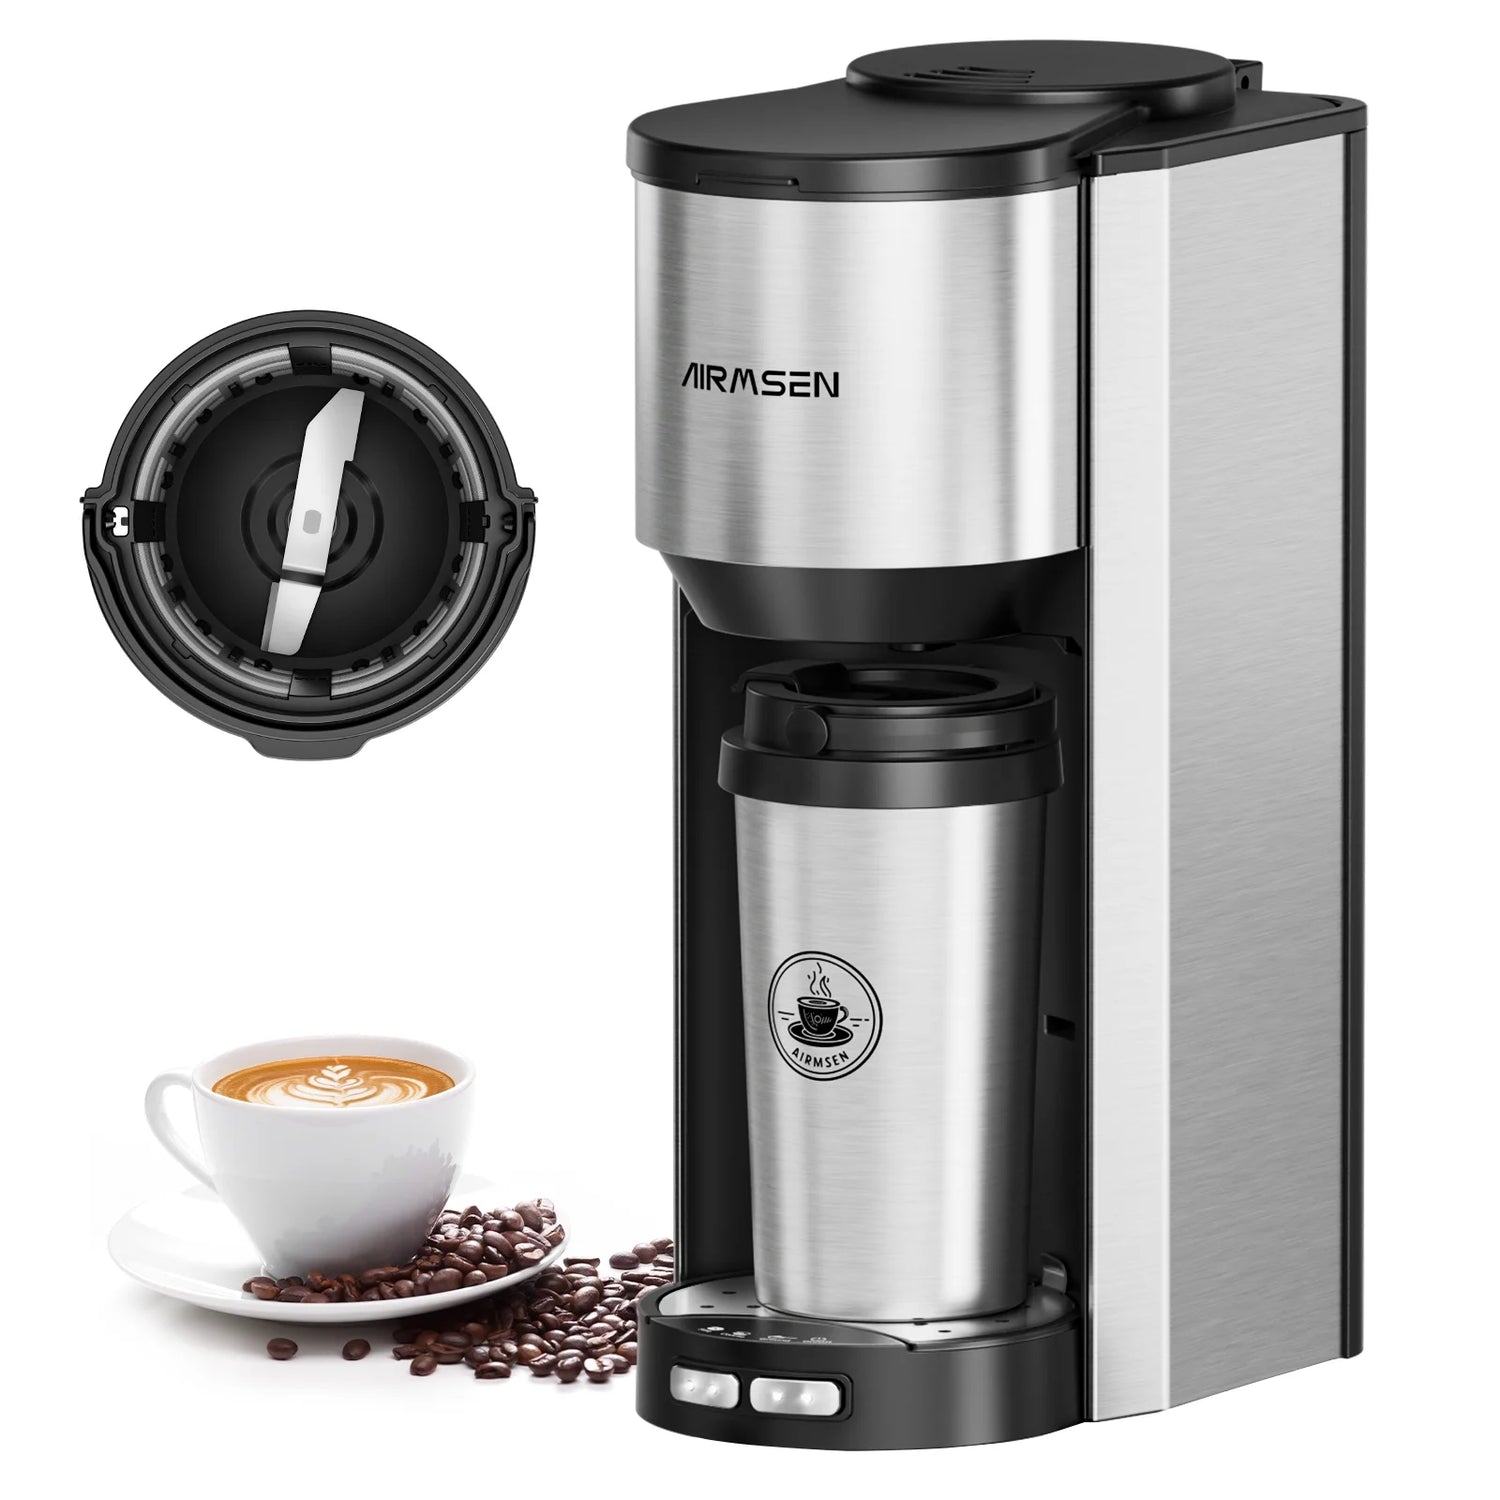 Single Serve Coffee Maker with Grinder - Beans & Ground Include Travel Mug